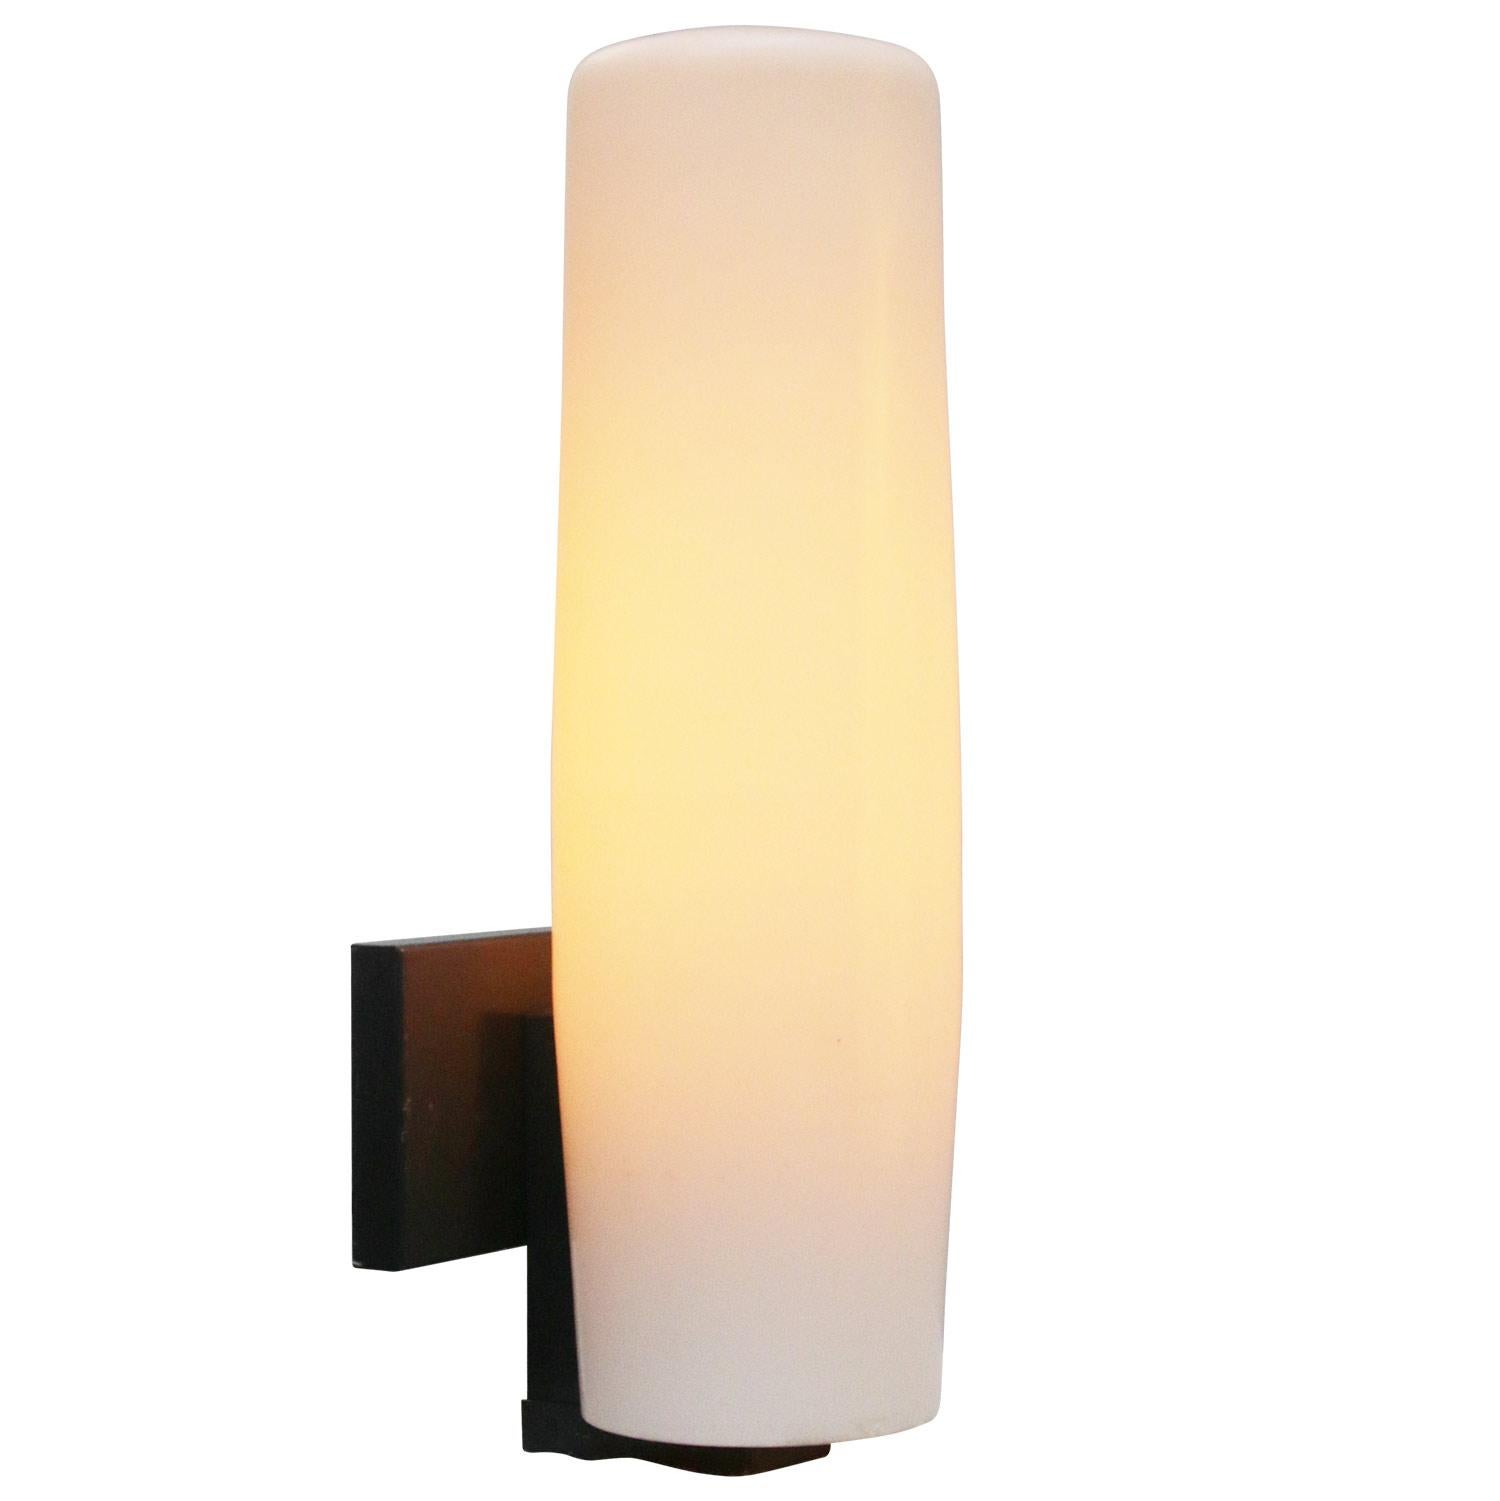 Metal and opaline glass wall lamp.
Used in a Dutch monastery

wall plate 13 × 8 cm

for use inside only

Weight: 1.20 kg / 2.6 lb

Priced per individual item. All lamps have been made suitable by international standards for incandescent